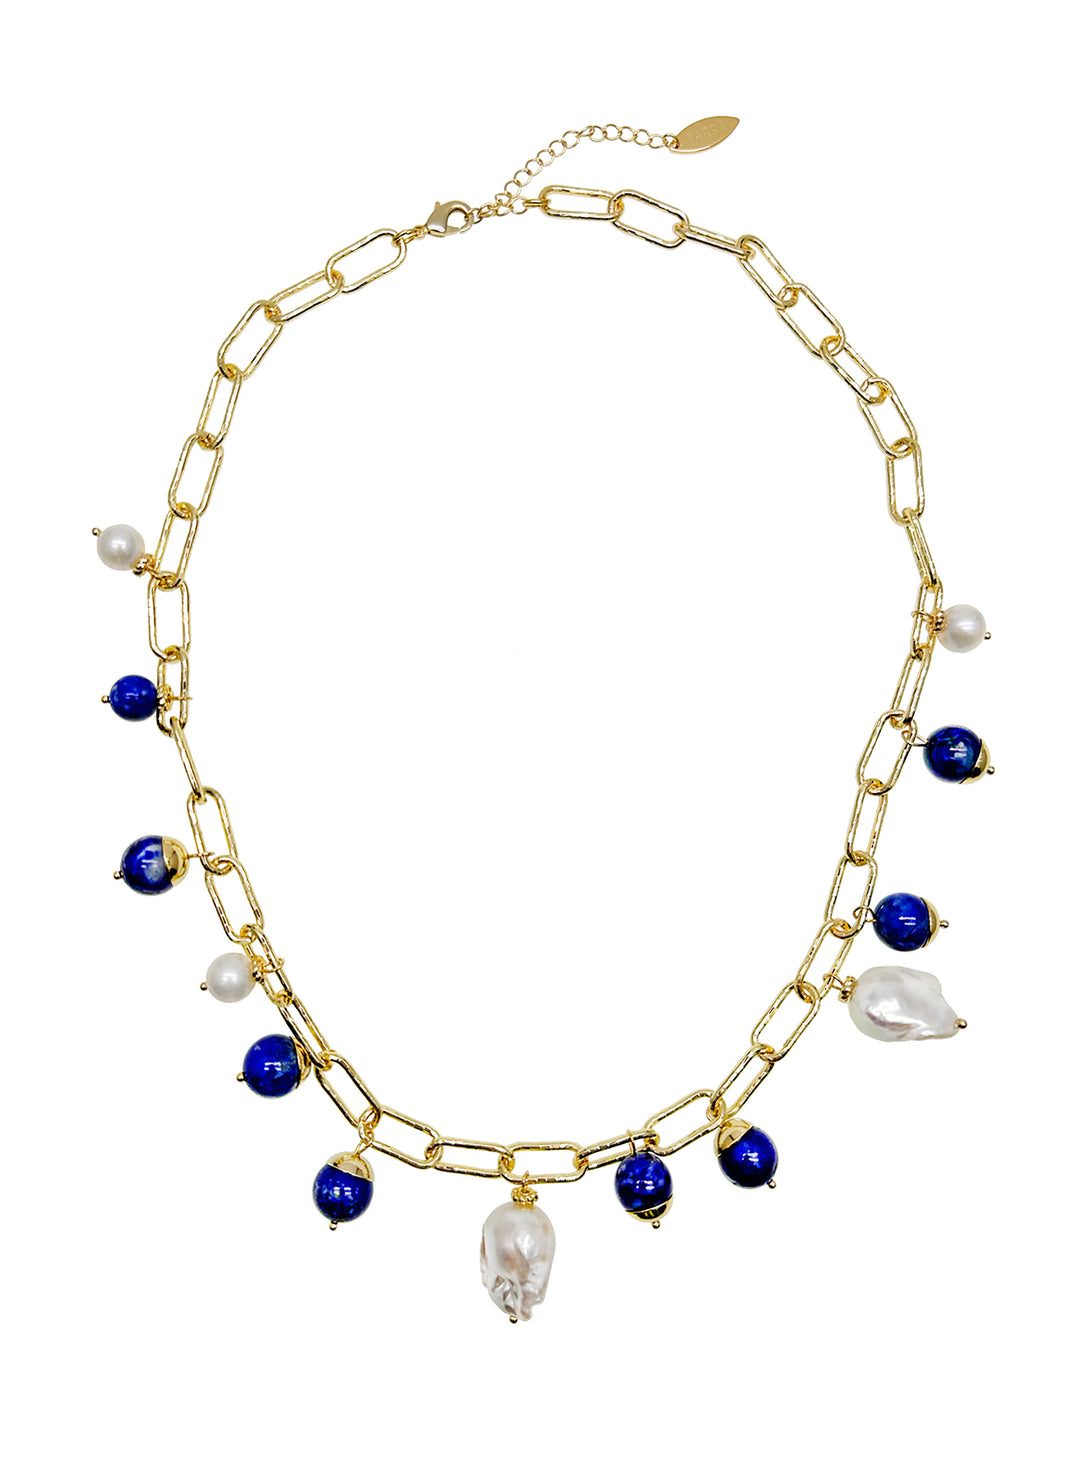 Gold Chain with Baroque Pearls and Lapis Charms Necklace JN022 - FARRA